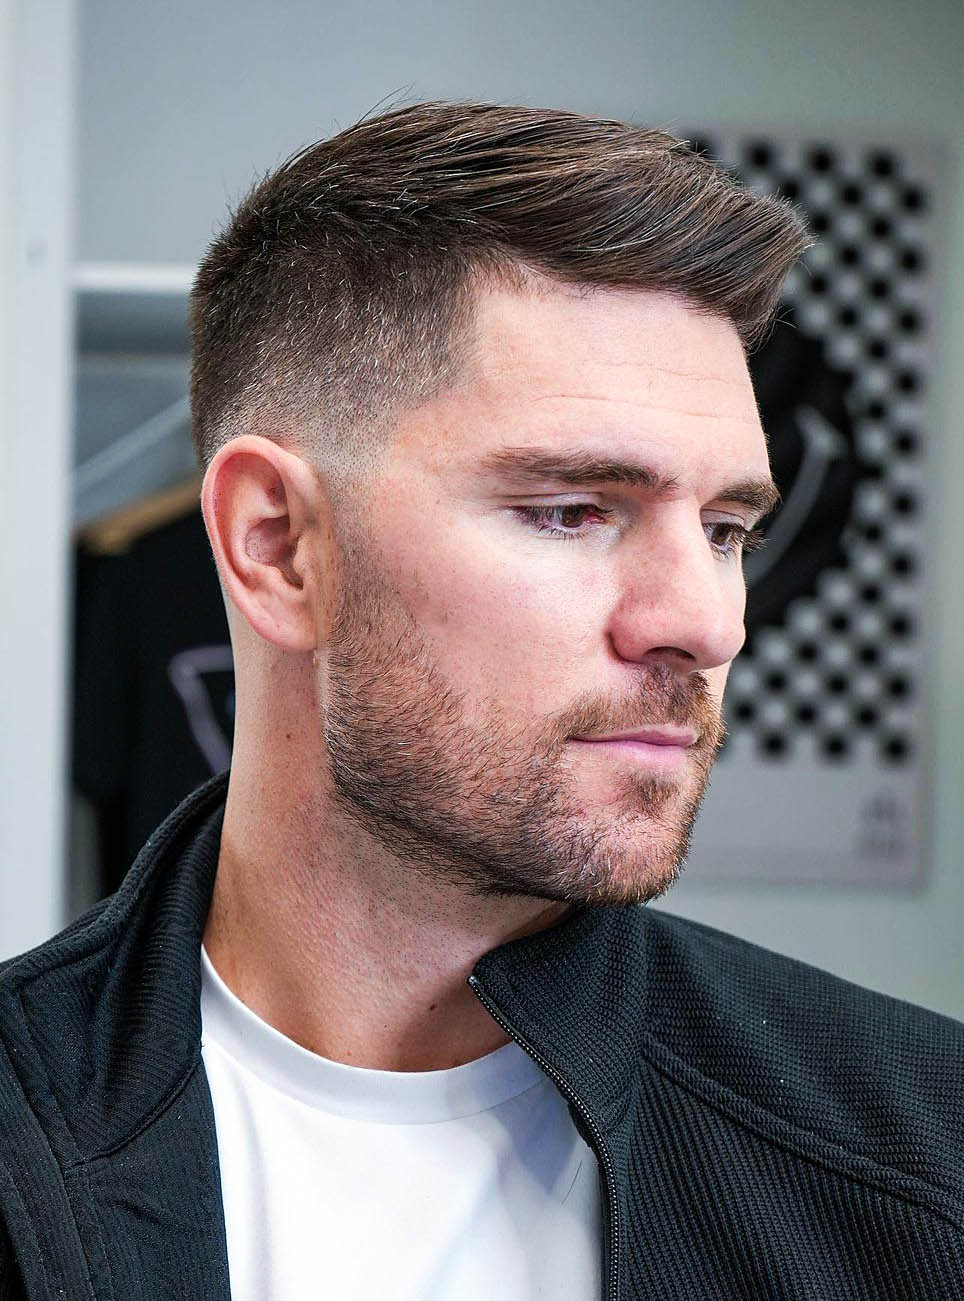 40 Crew Cut Examples: A Great Choice For Modern Men | Haircut Inspiration